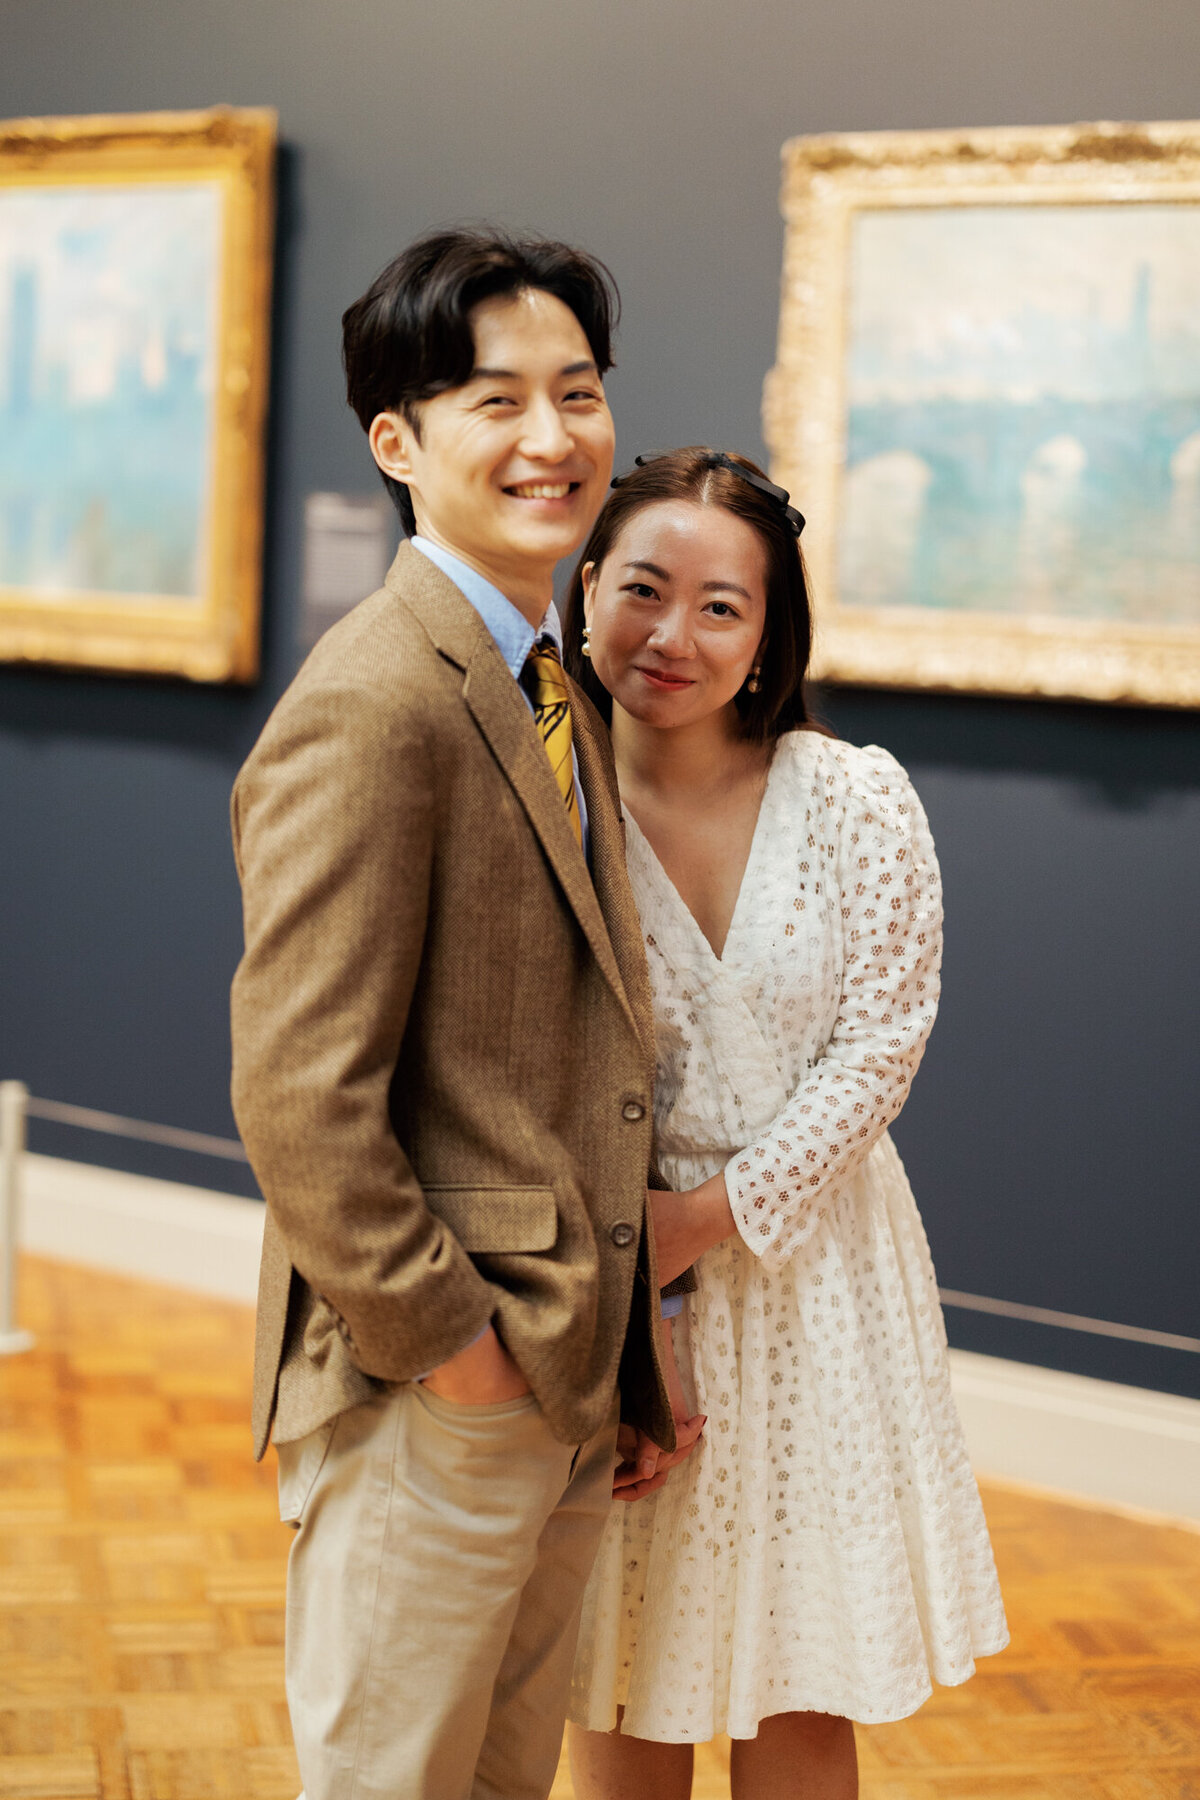 A beautiful engagement photo at the Art Institute of Chicago